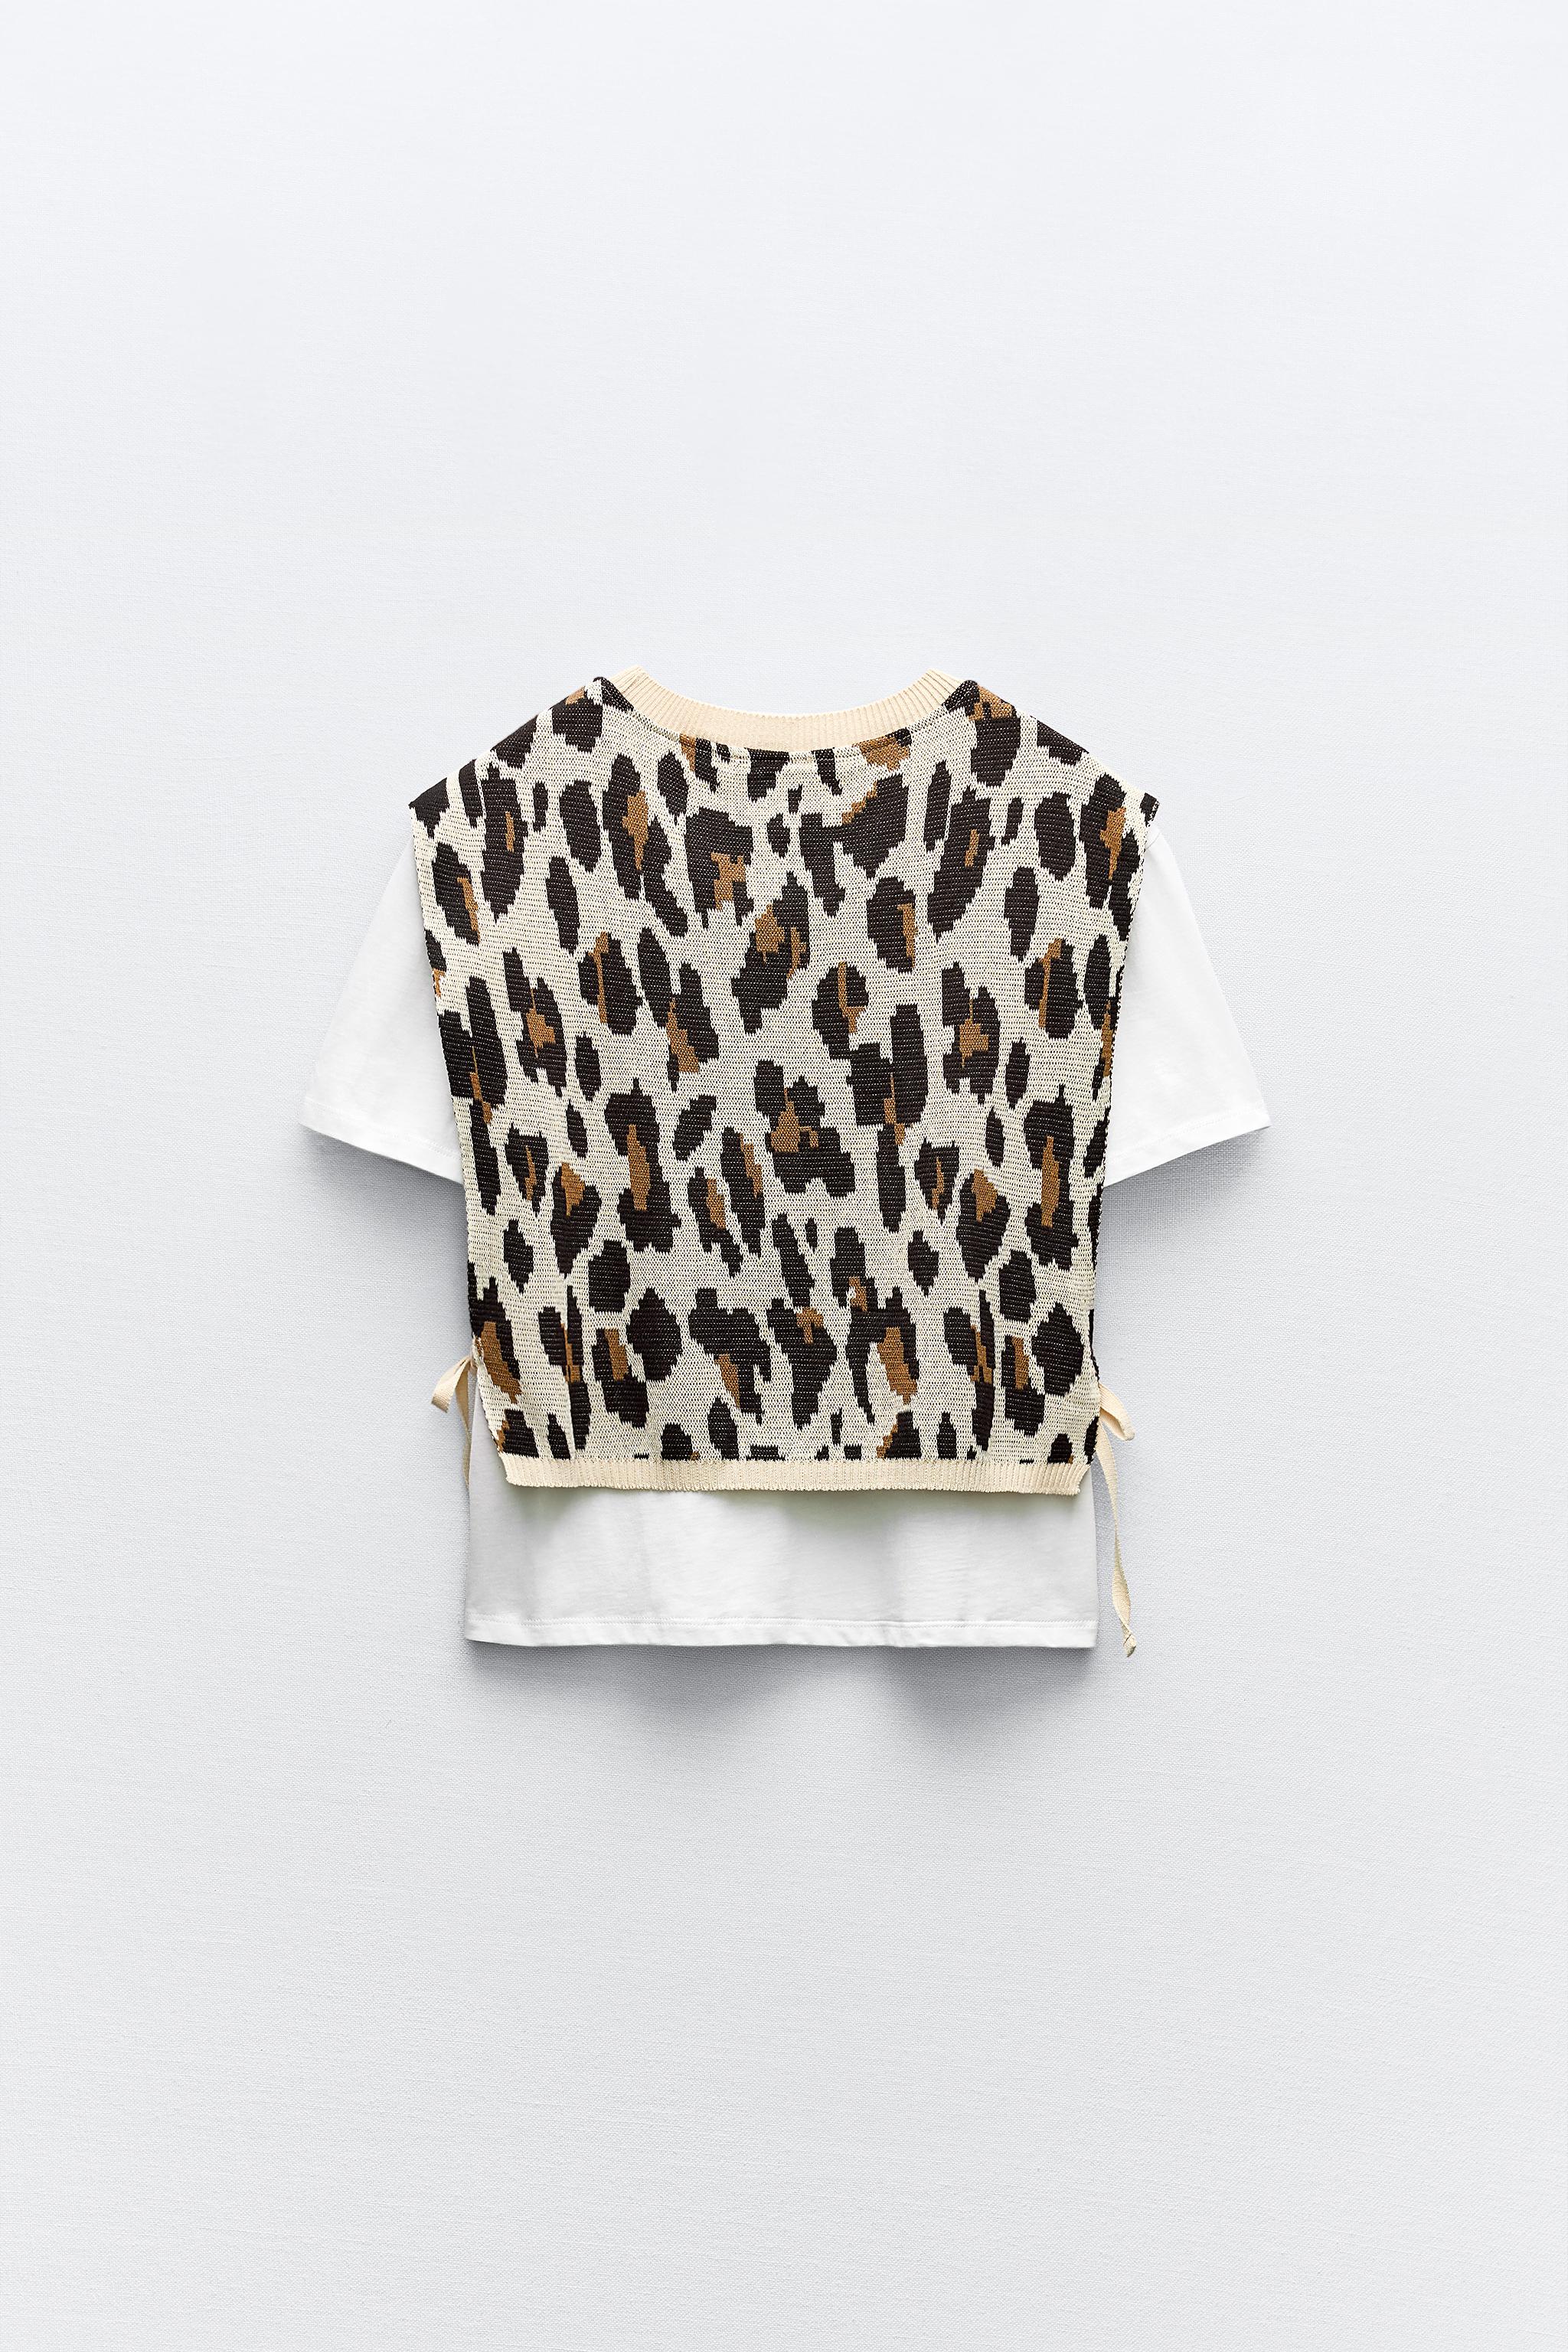 SHIRT AND ANIMAL PRINT VEST WITH TIES - Leopard | ZARA United States